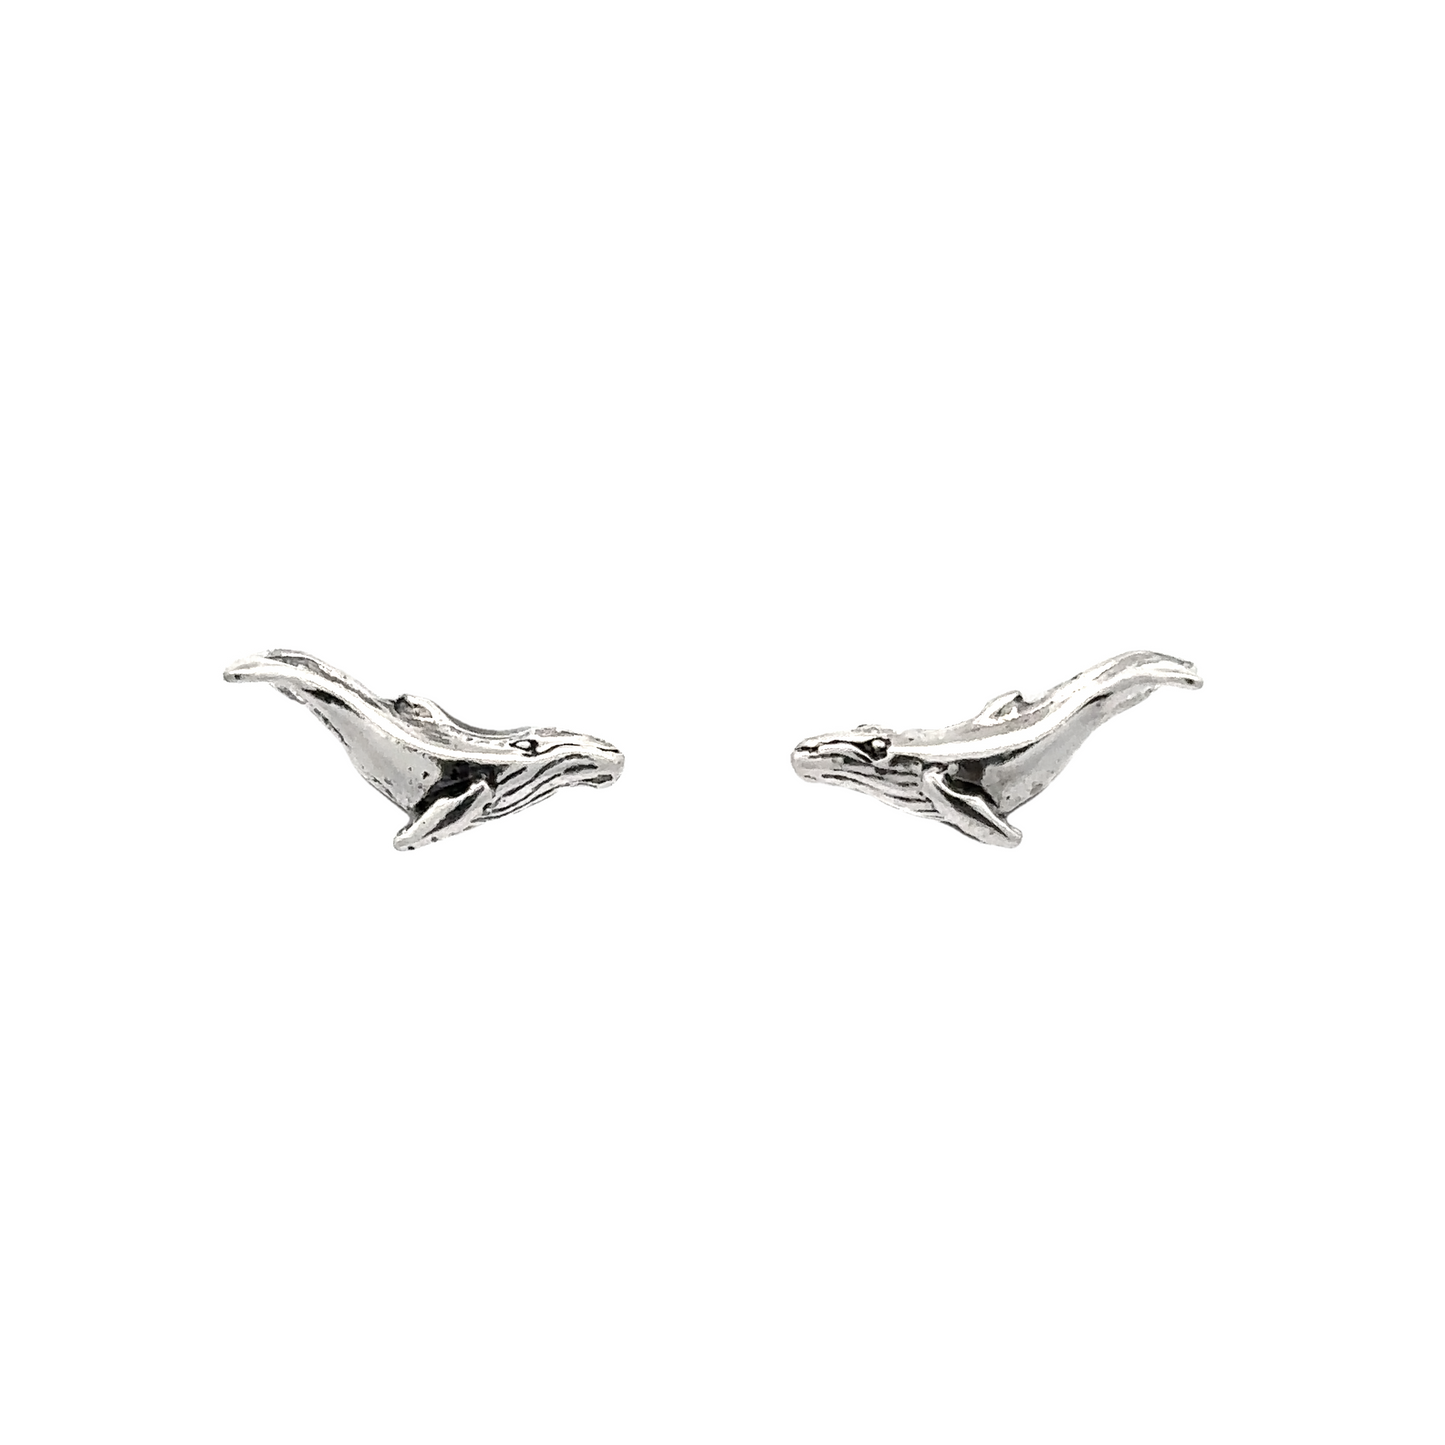 Ocean-inspired Whale Studs made of .925 Sterling Silver, showcased on a pristine white background.